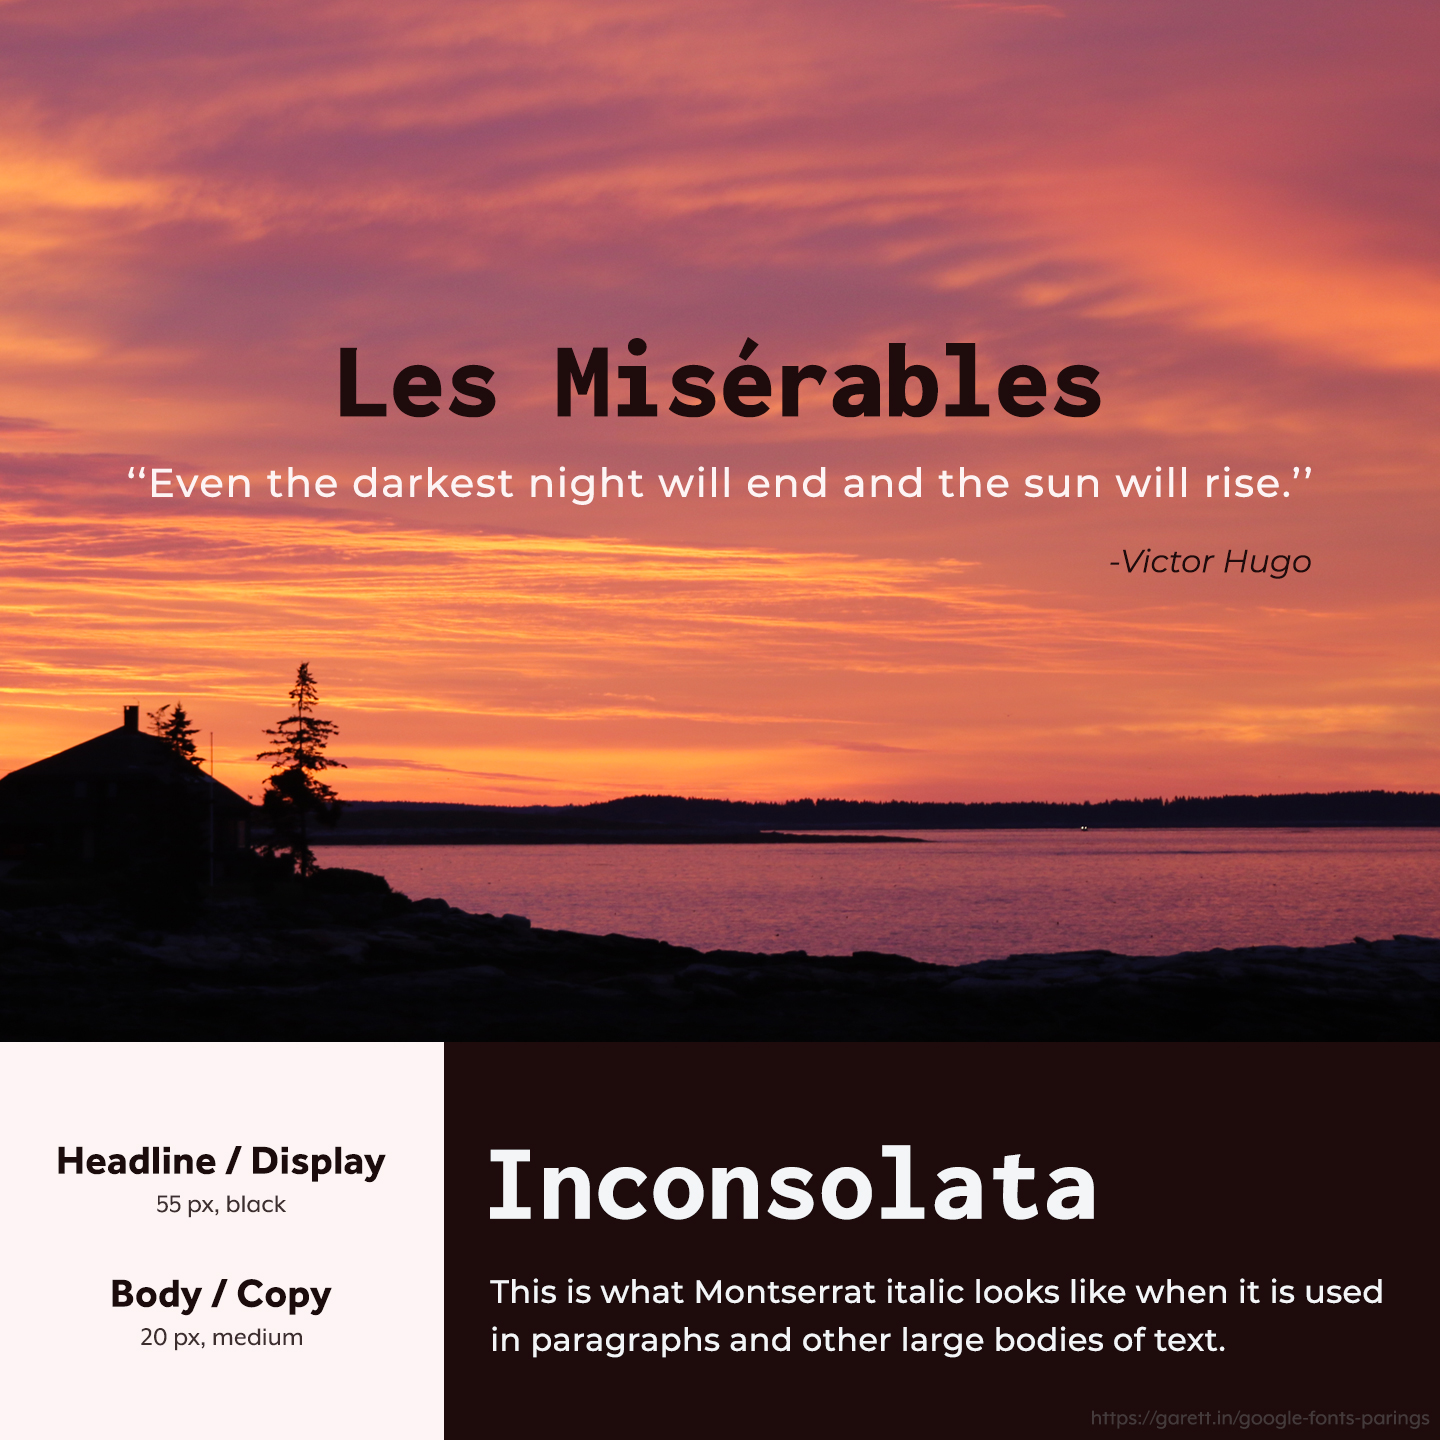 Inconsolata and Montserrat font pairing - 30 Google Font Pairings for Your Brand and Website